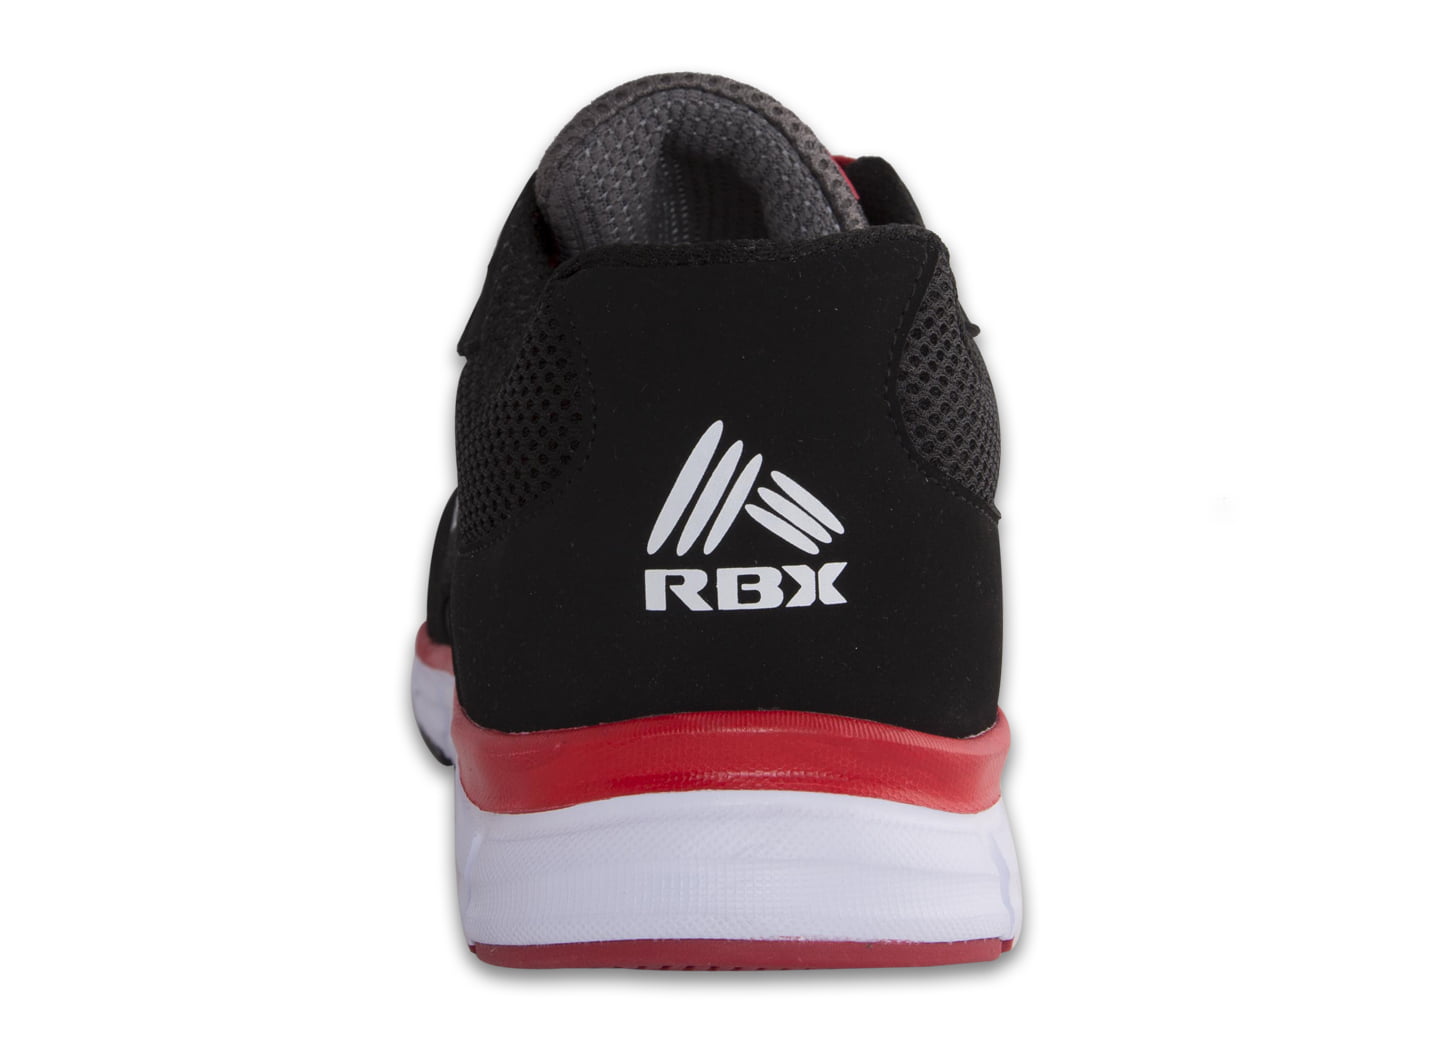 rbx live life active sneakers